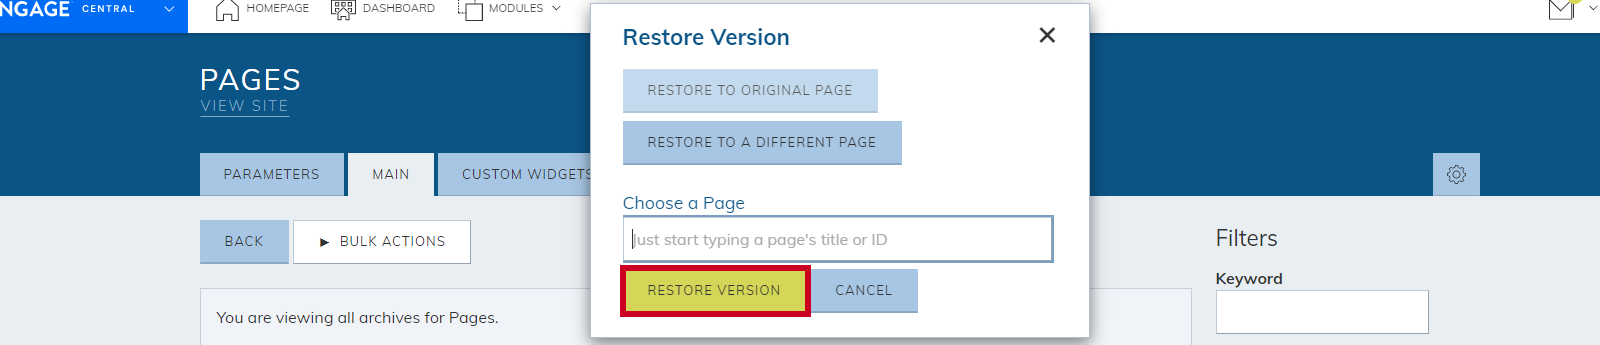 The button at the bottom of the pop-up modal labeled Restore Version.